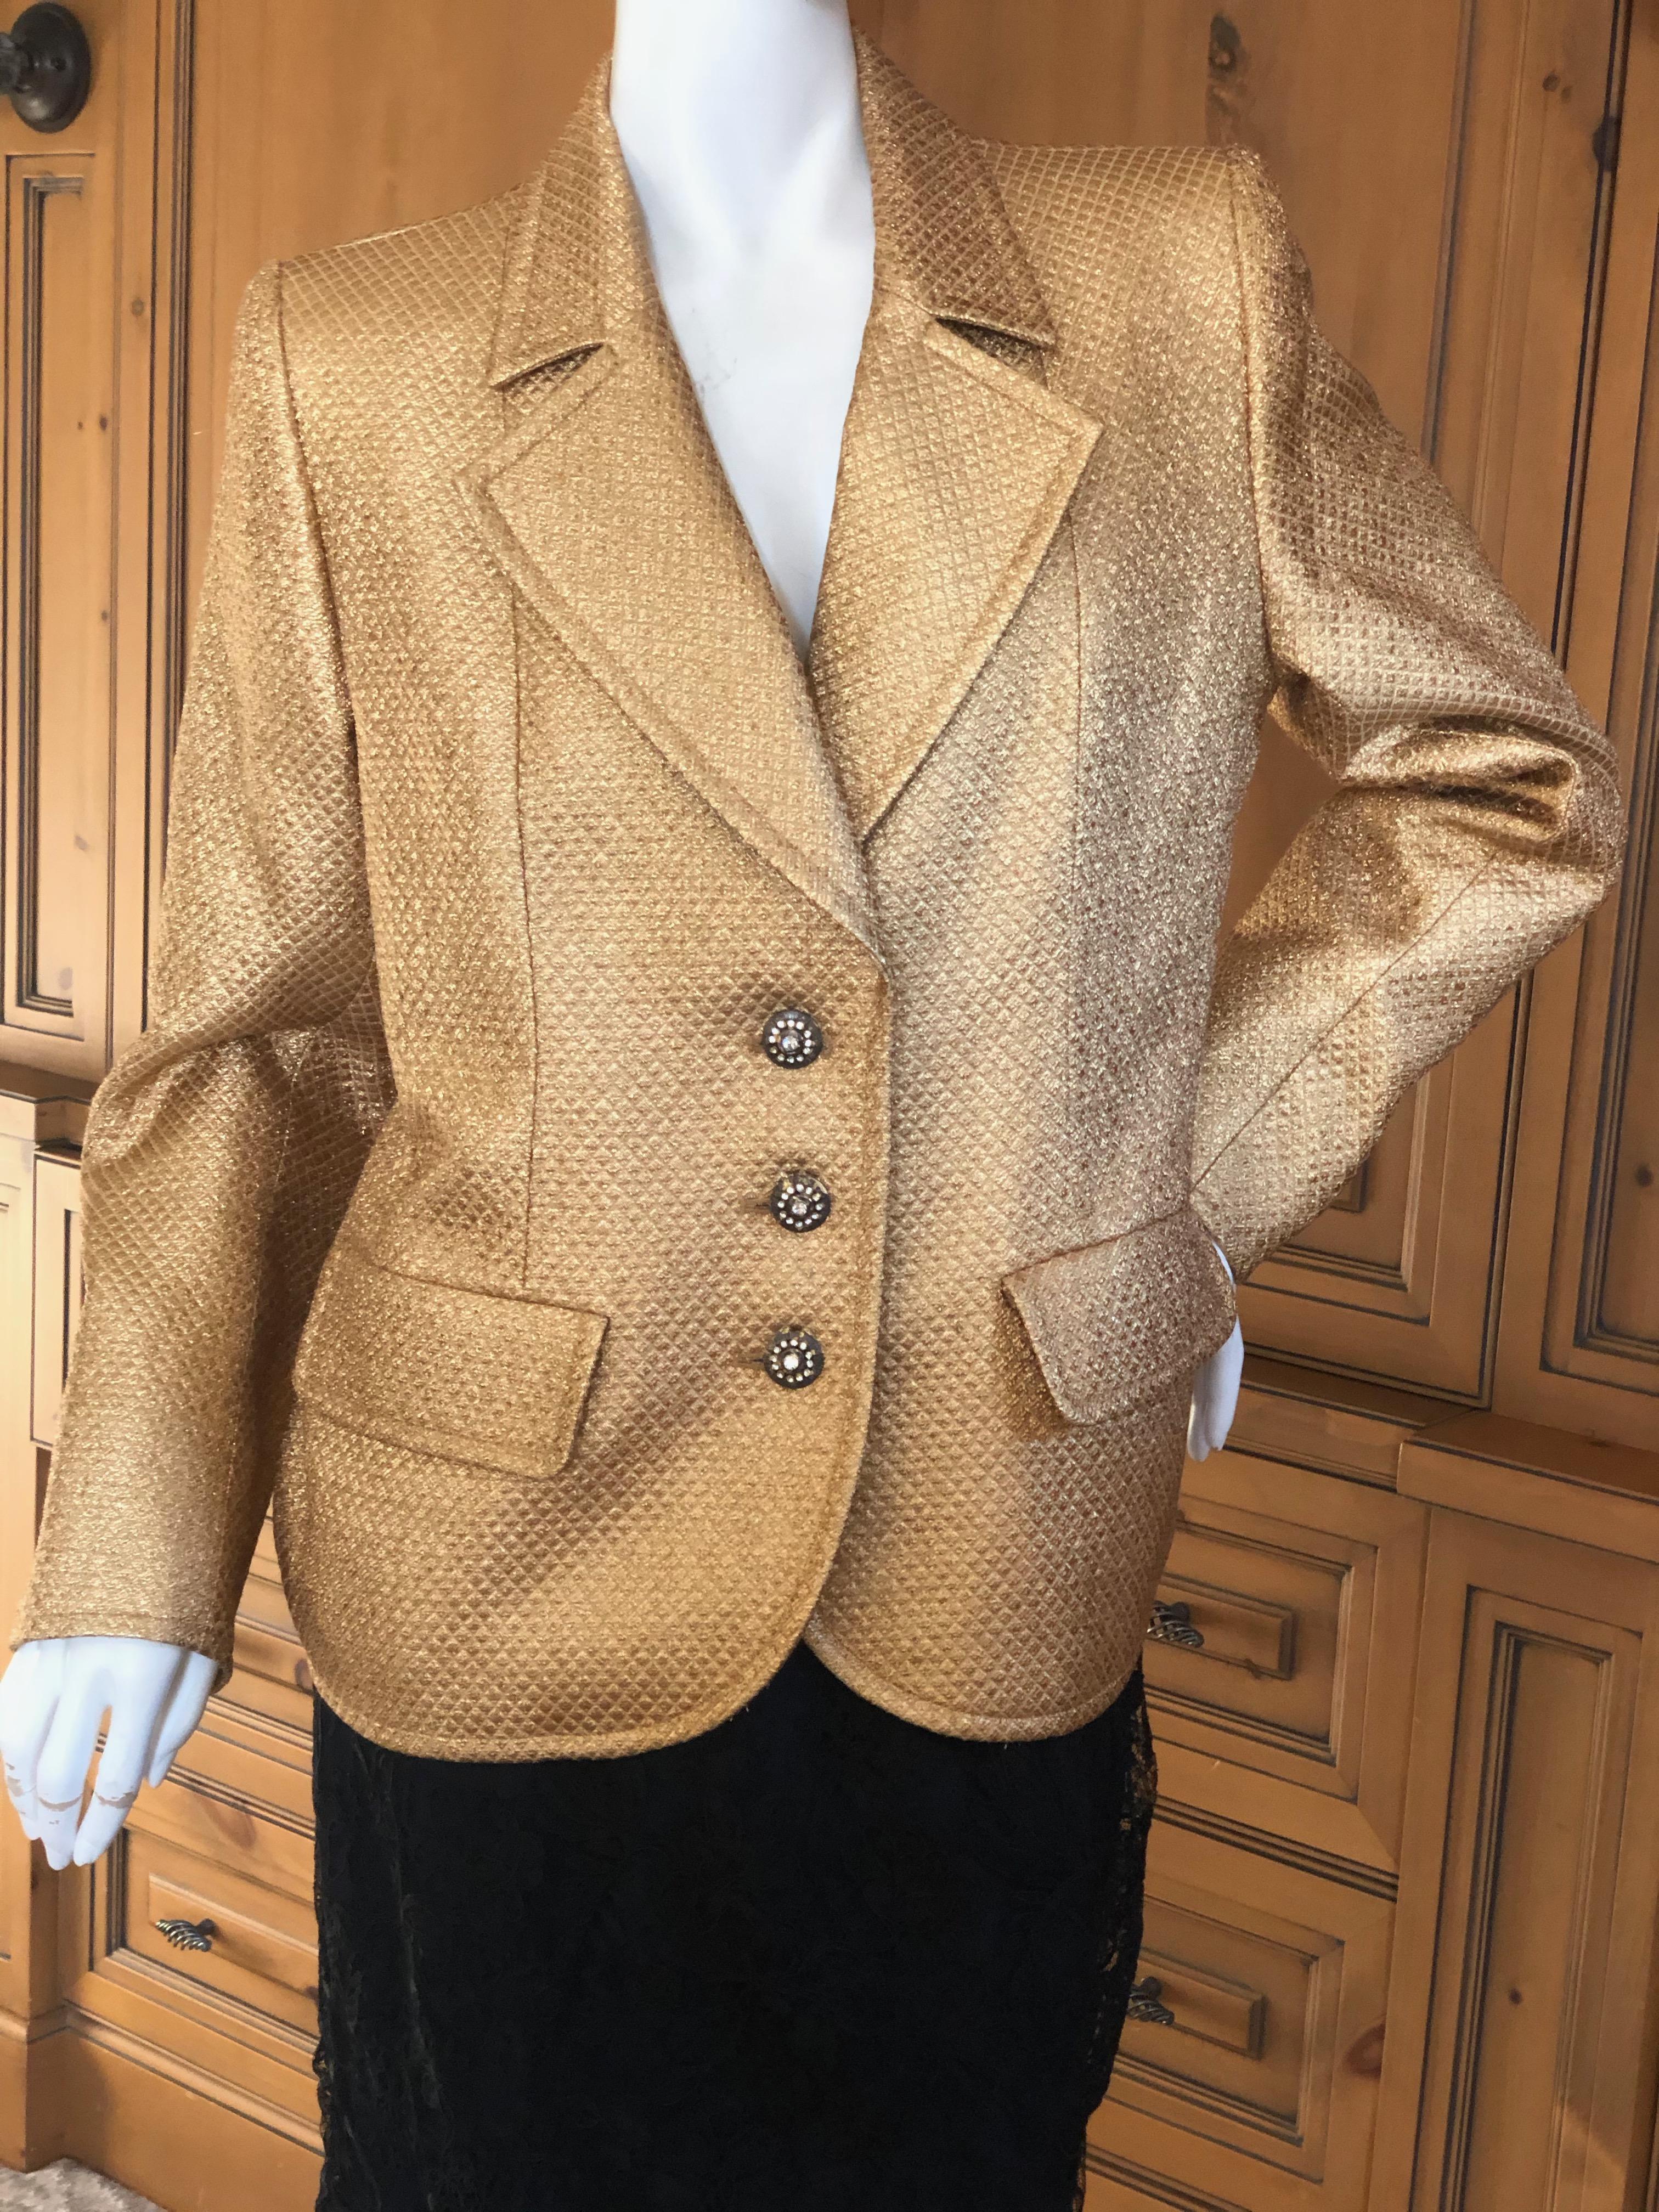 Yves Saint Laurent 1980's Gold Jacquard Jacket with Crystal Buttons For Sale 4